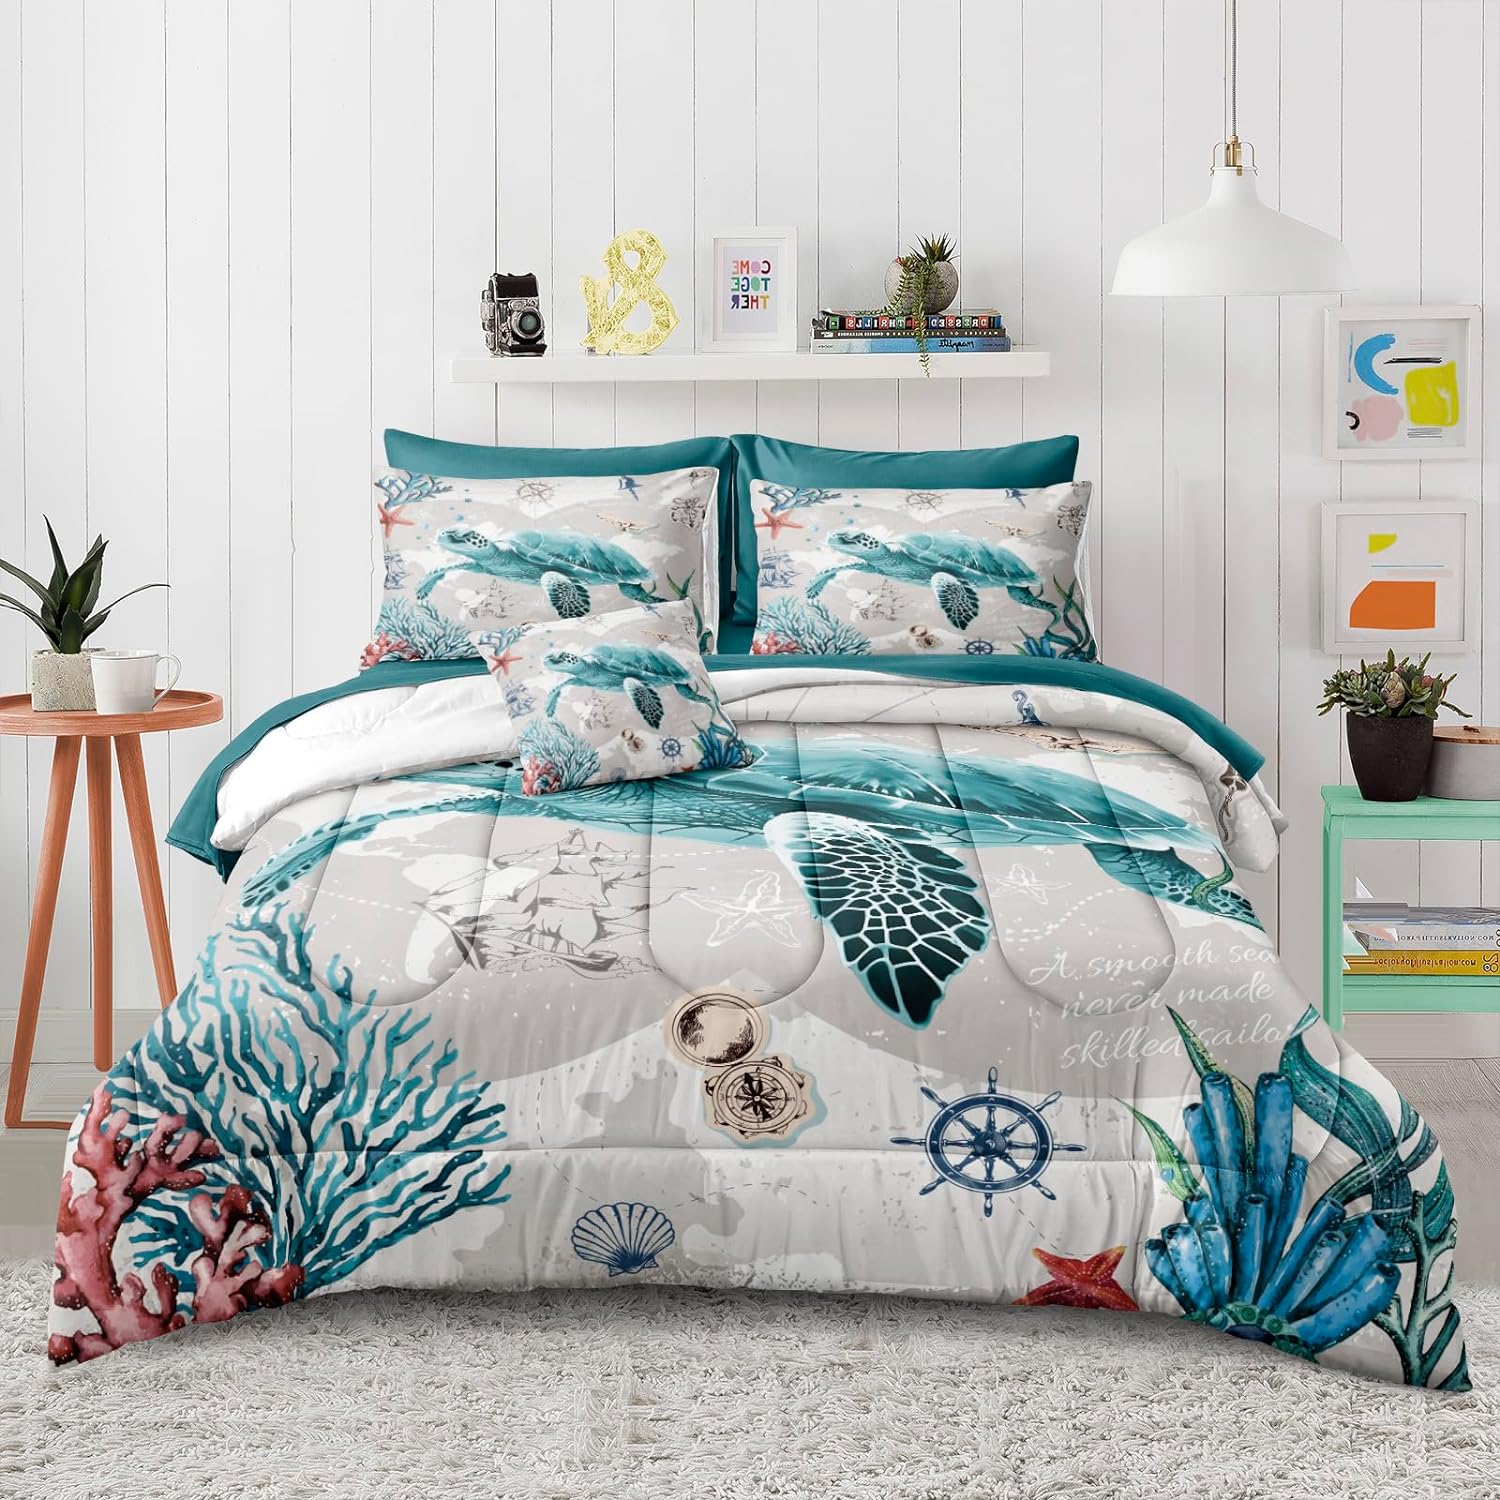 Bedbay 8 Pieces Nautical Bedding Sea Turtle Queen Comforter Set with Sheets Turquoise Comforter Retro Style Teen Girls Boys Turtle Bedding Set Ocean Themed Soft Fluffy Bed Set(Ocean,Queen)